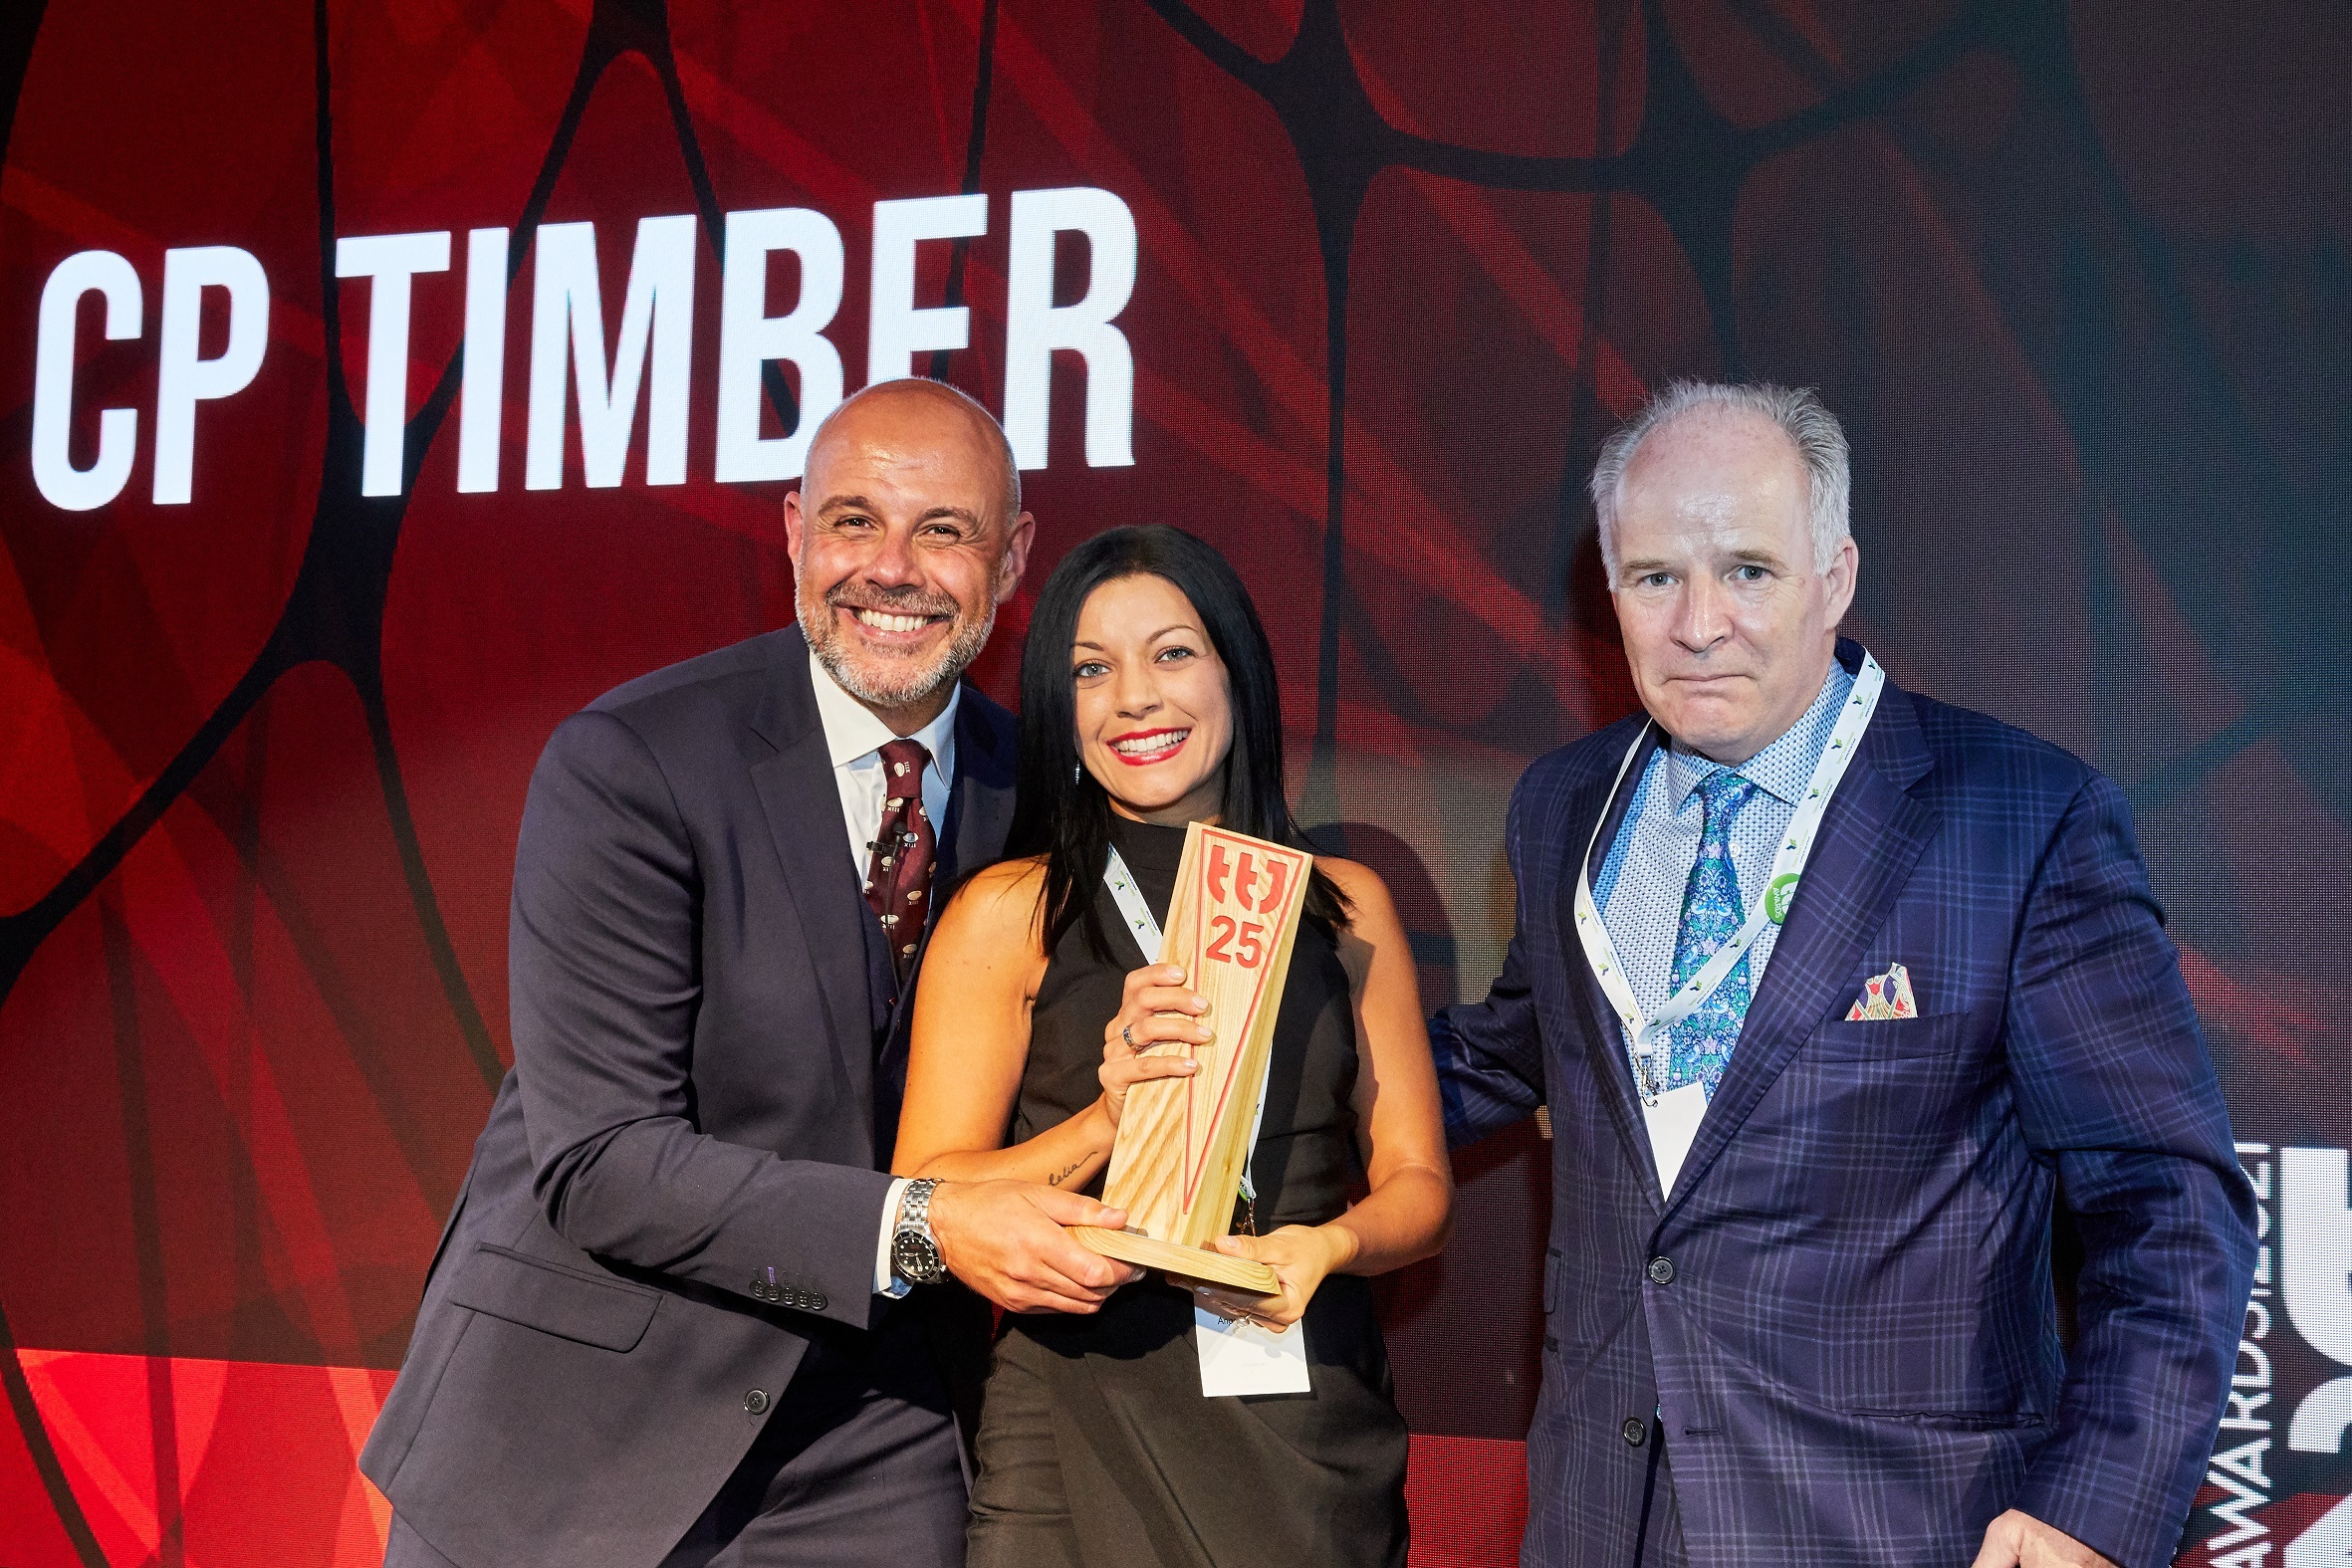 Image to represent C P Timber Recognised in National Timber Trade Journal Awards 2021